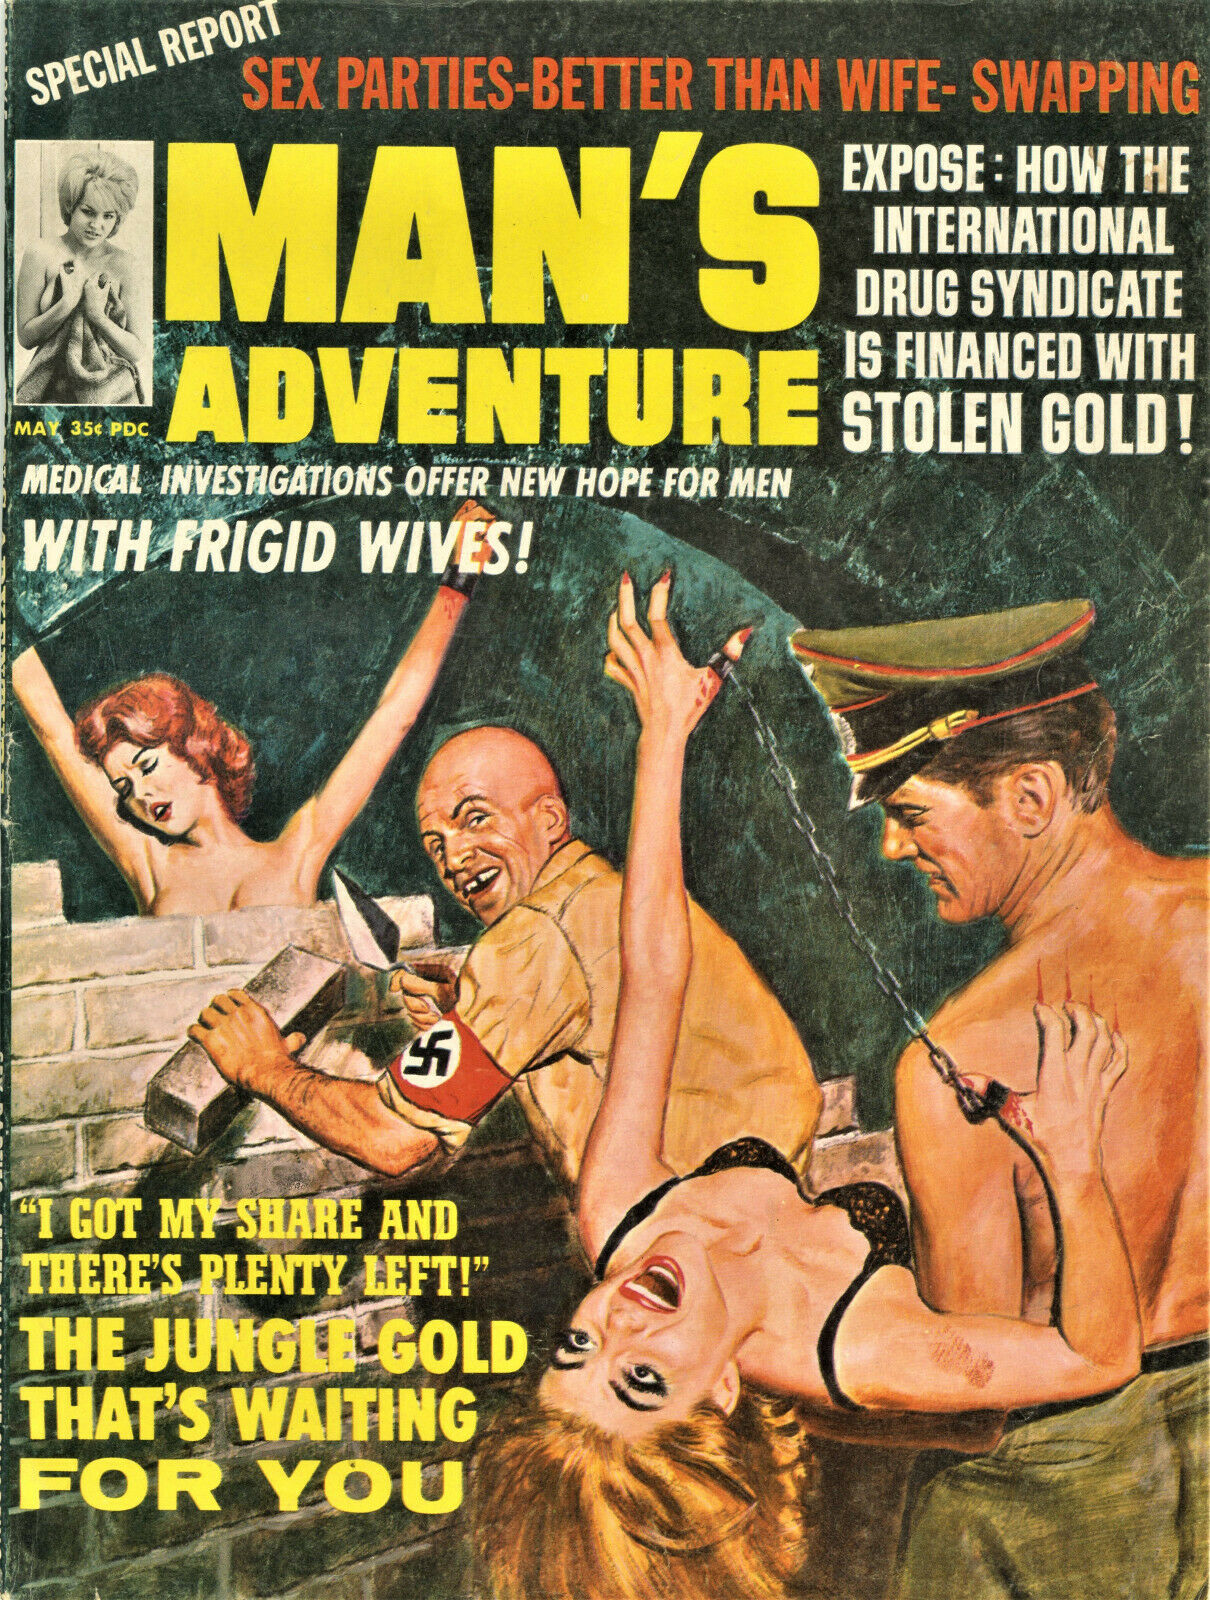 Medical Investigations Offer New Hope For Men With Frigid Wives -- Pulp Covers pic